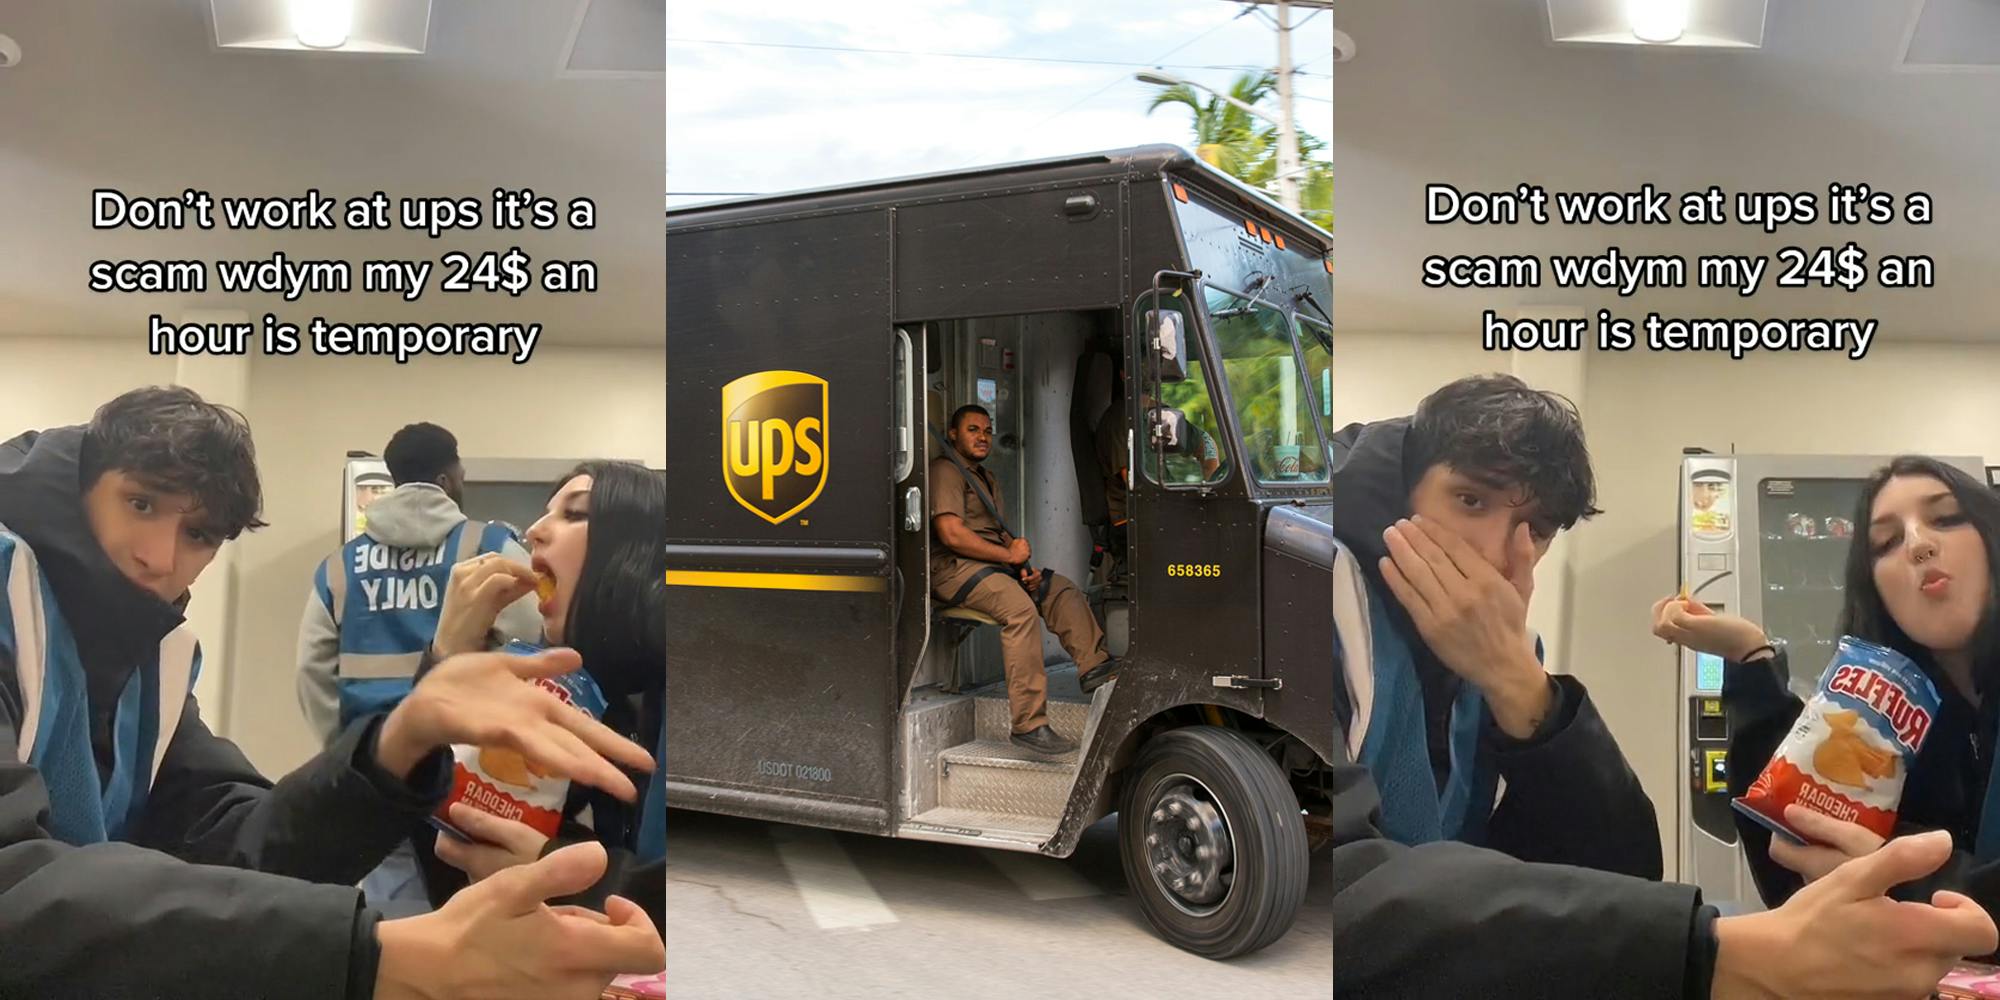 UPS workers with caption "Don't work at ups it's a scam wdym my $24 an hour is temporary" (l) UPS worker driving truck (c) UPS workers with caption "Don't work at ups it's a scam wdym my $24 an hour is temporary" (r)